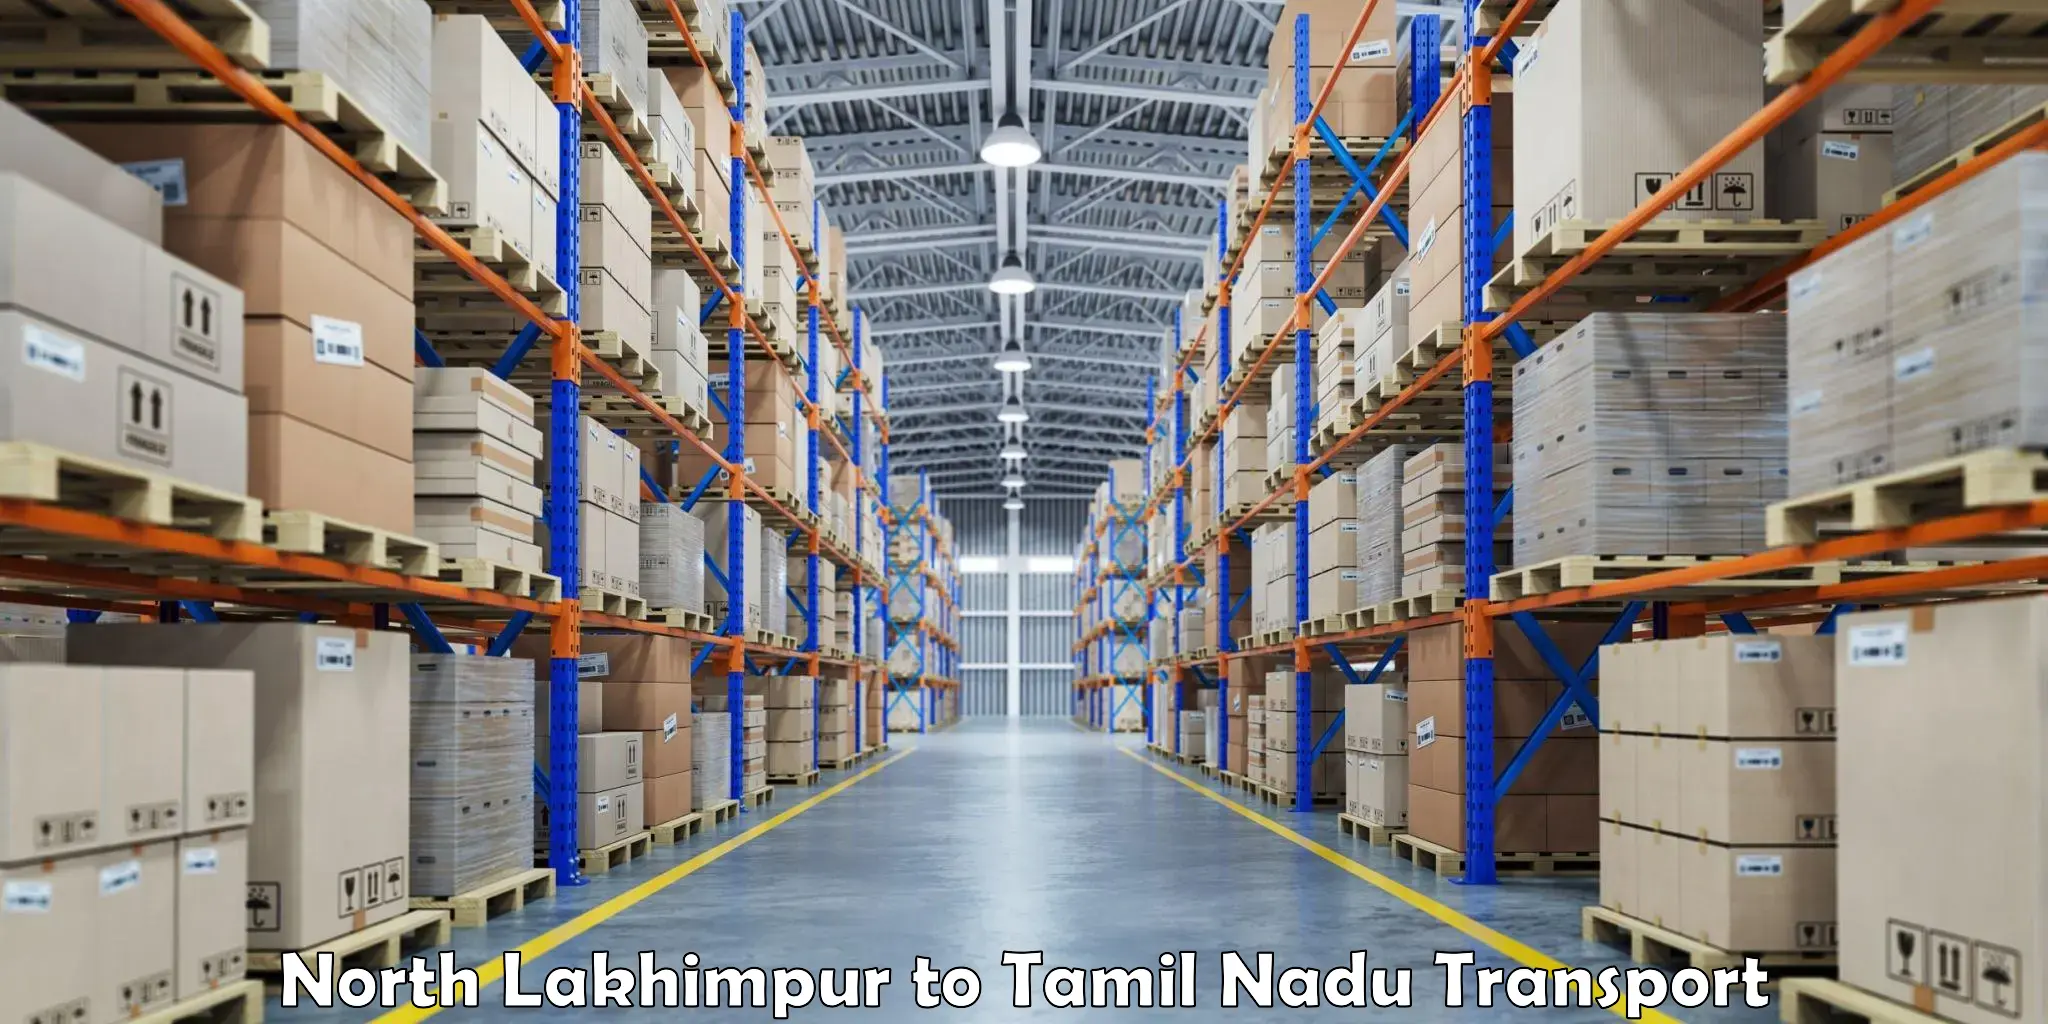 Road transport online services North Lakhimpur to Tuticorin